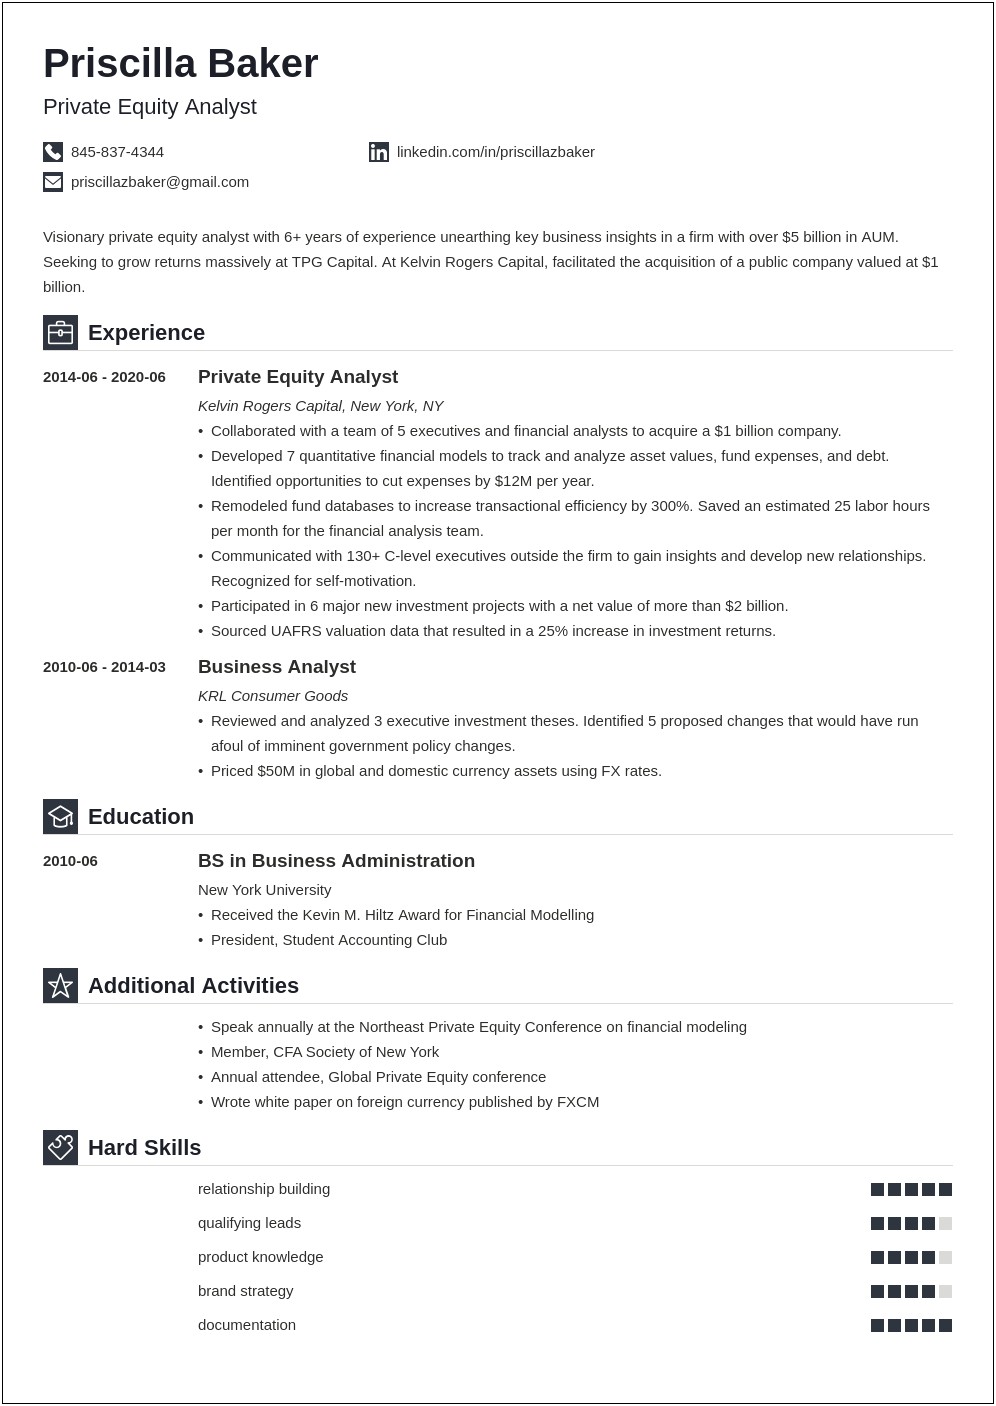 Investment Banking Student Club Description For Resume